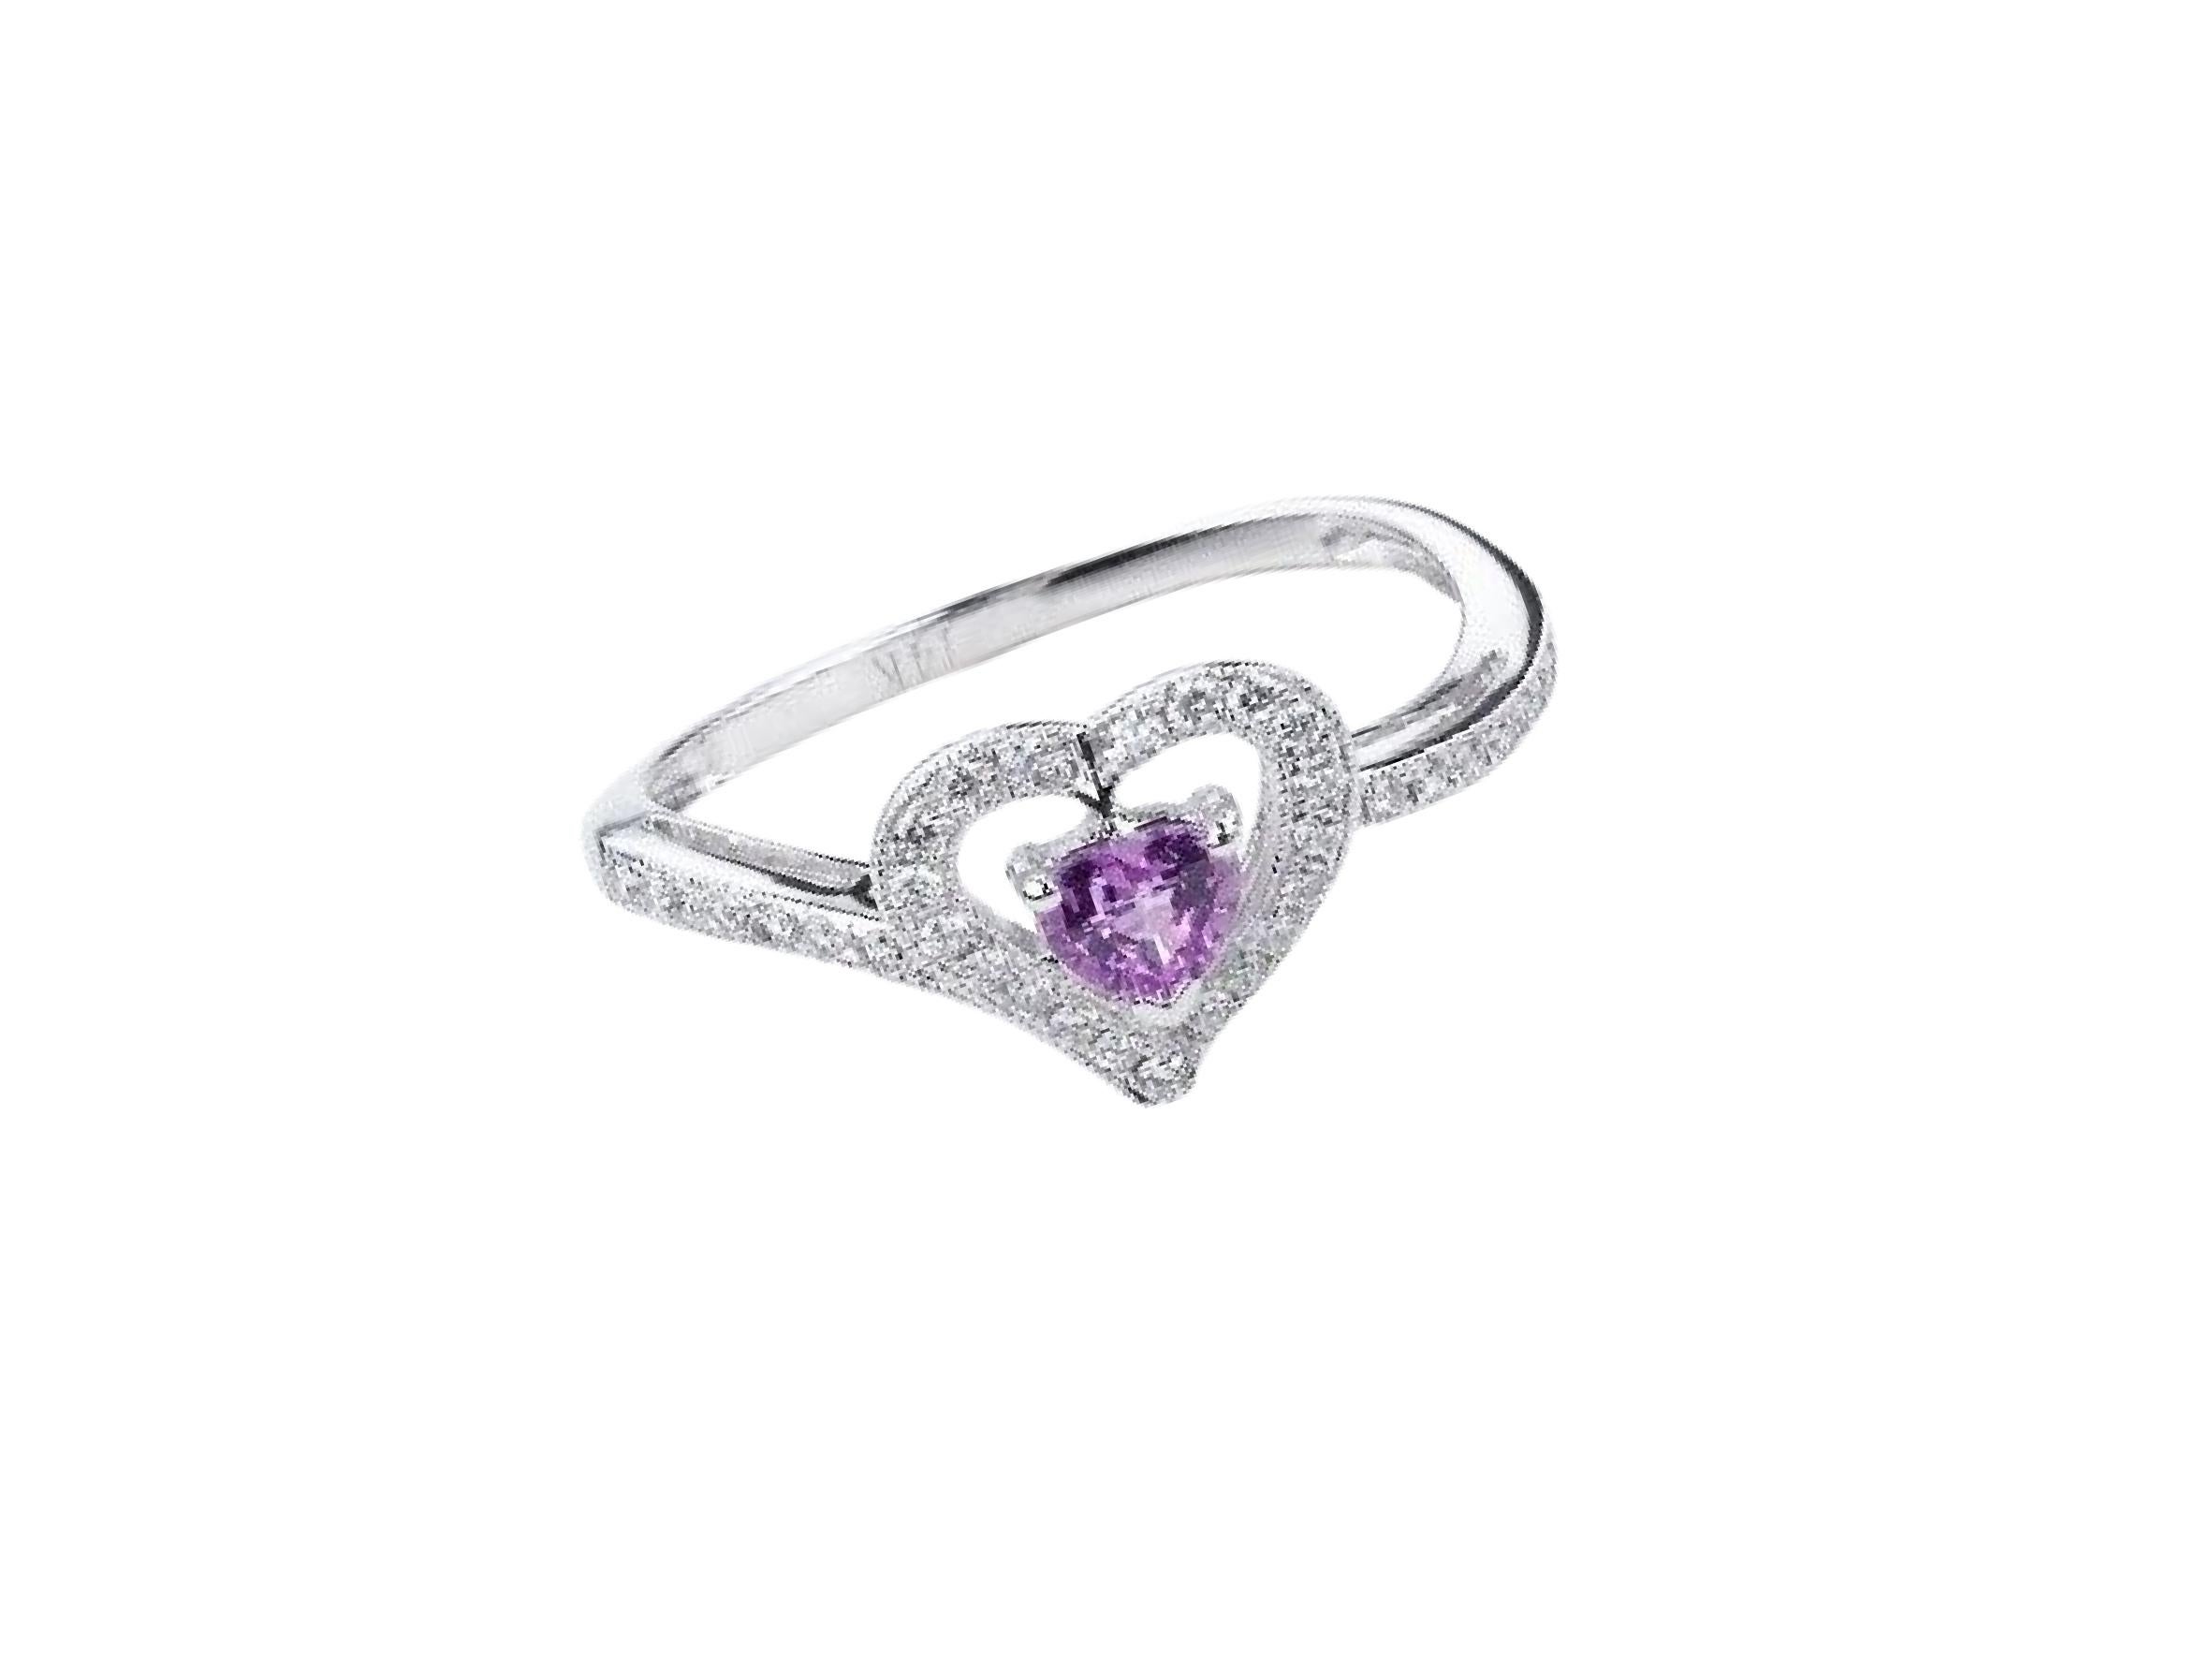 For Sale:  0.403 Carat Pink Sapphire and Diamond Heart Ring in 14 Karat White Gold 2